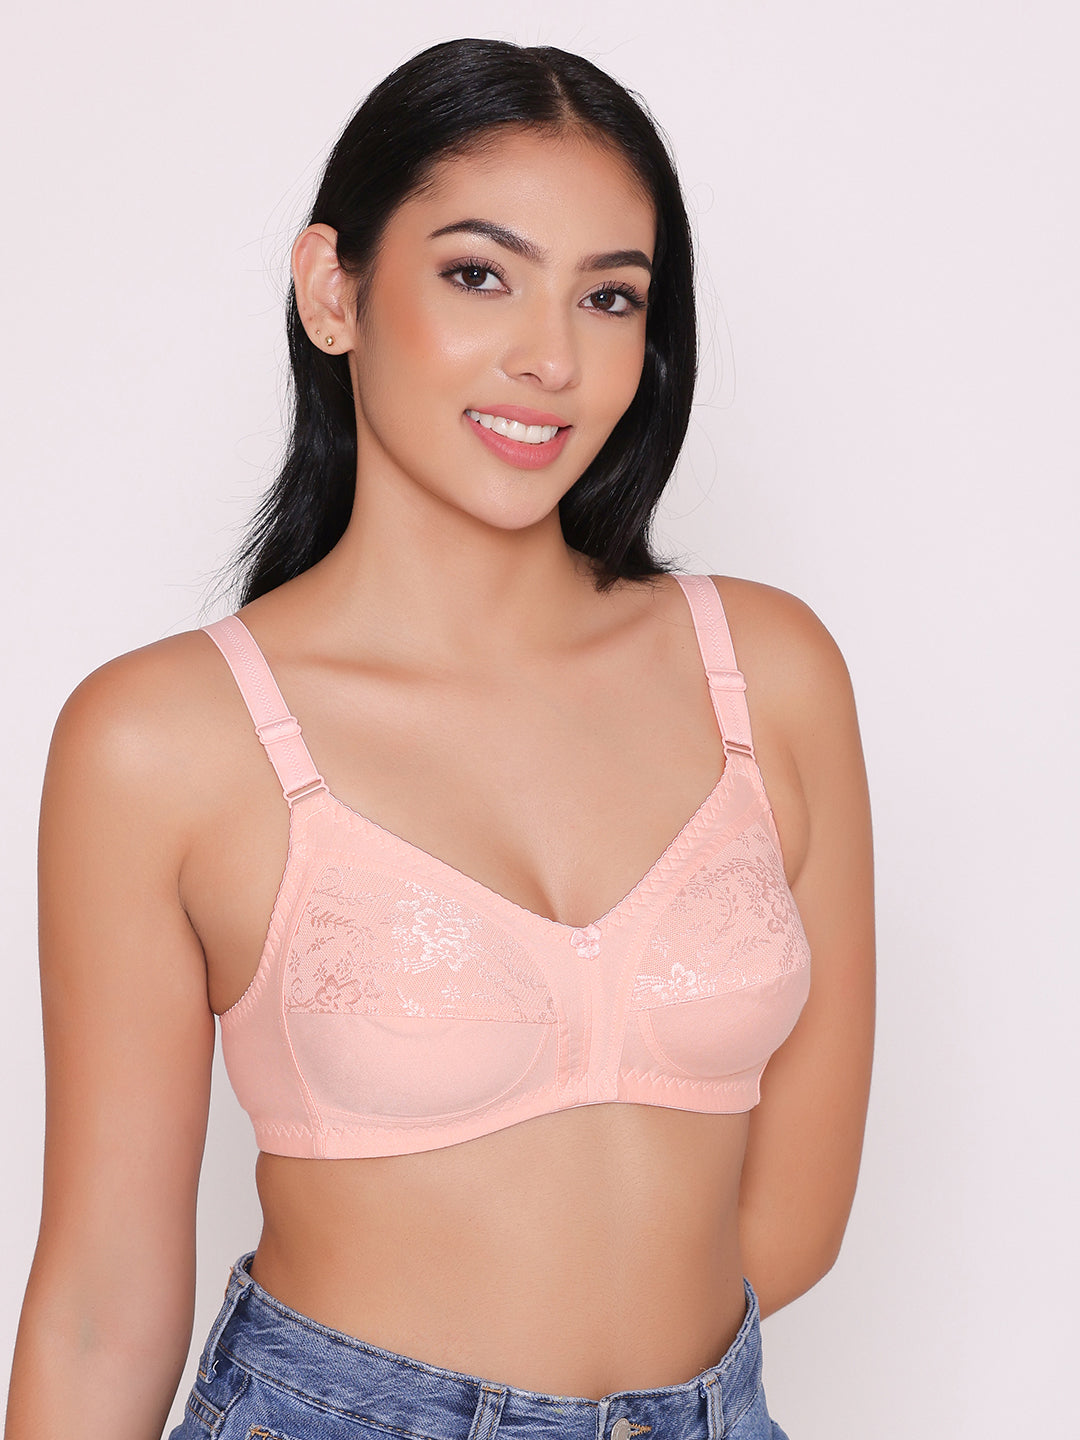 Best bra for daily use for women in India